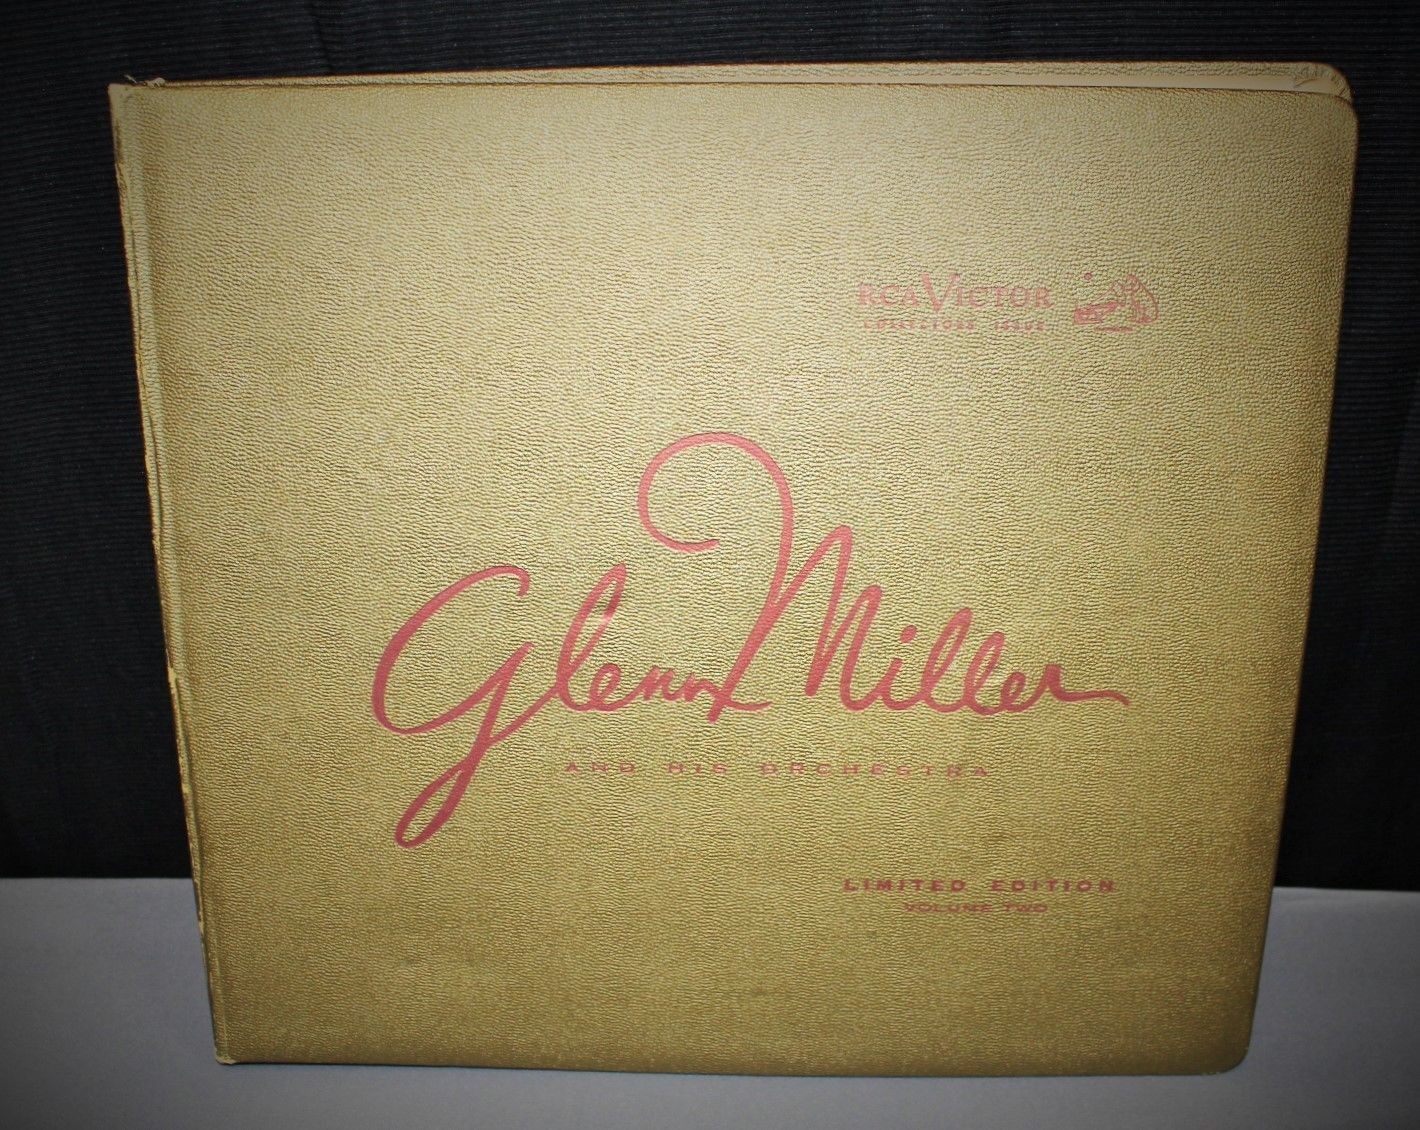 Glenn Miller Limited Edition BB 416 RCA 33 RPM Victor Records Collectors Album, Complete